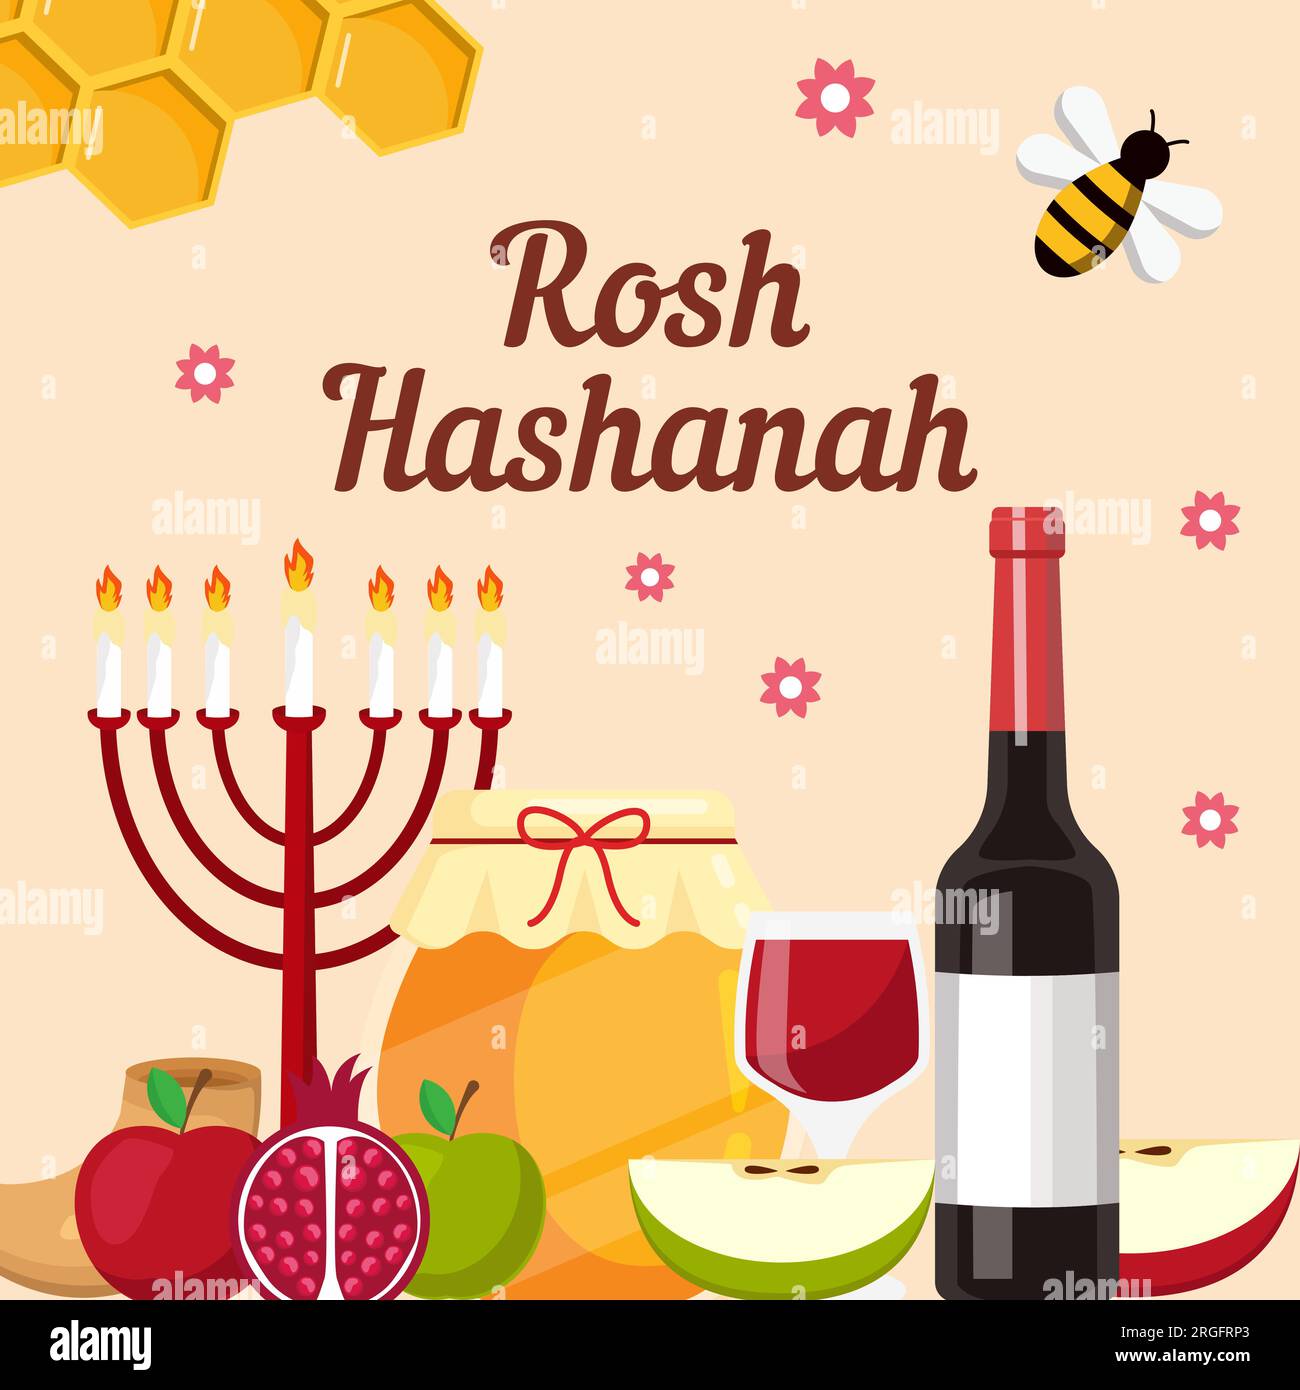 rosh hashanah illustration with wine, apples, pomegranate, honey, and bees Stock Vector